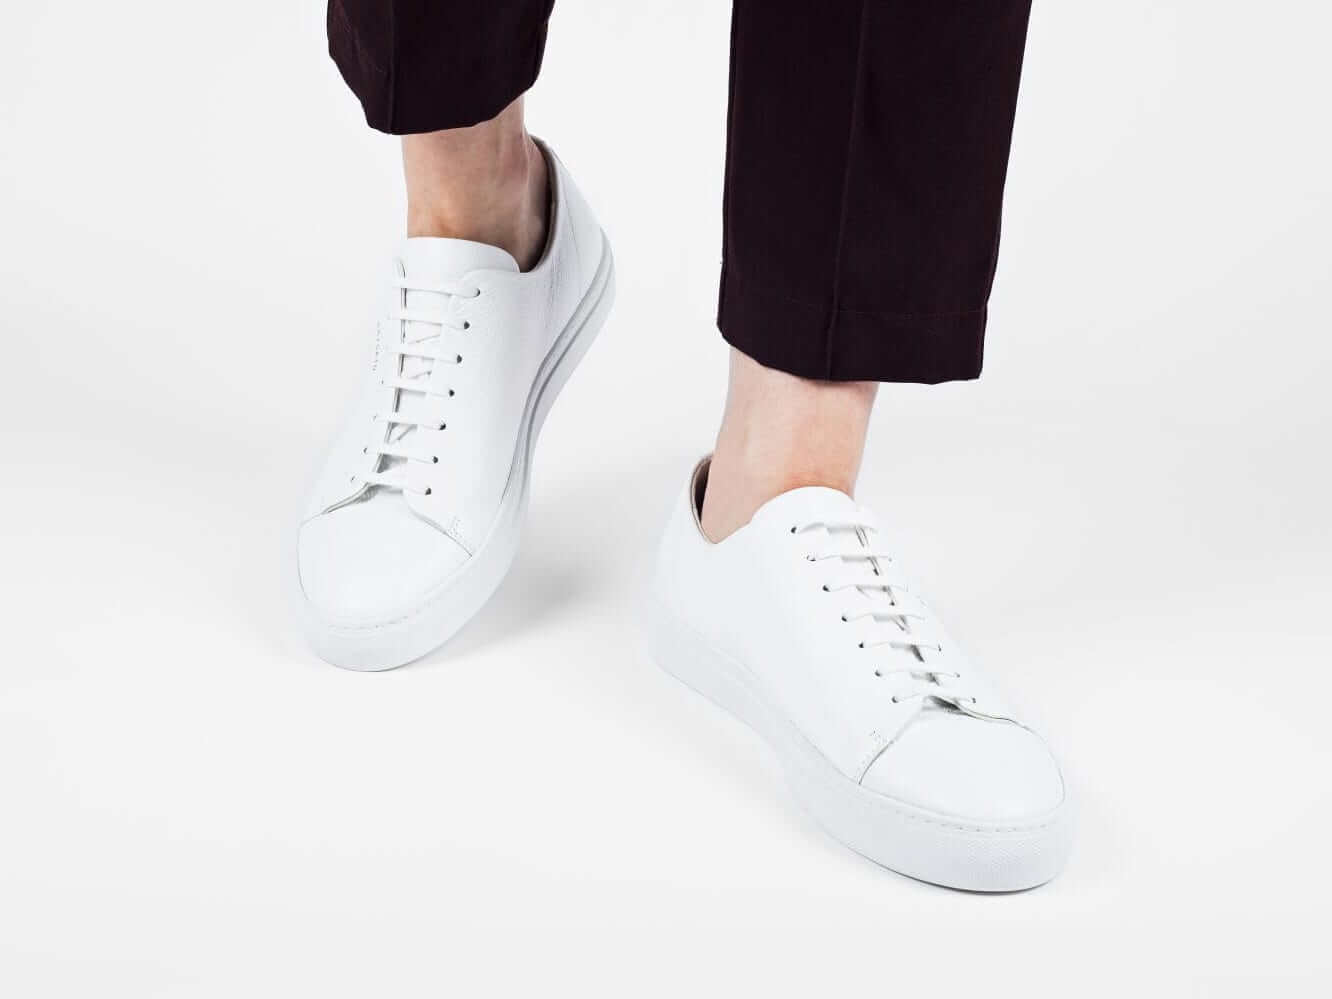 5 Pairs of Women's White Sneakers that 